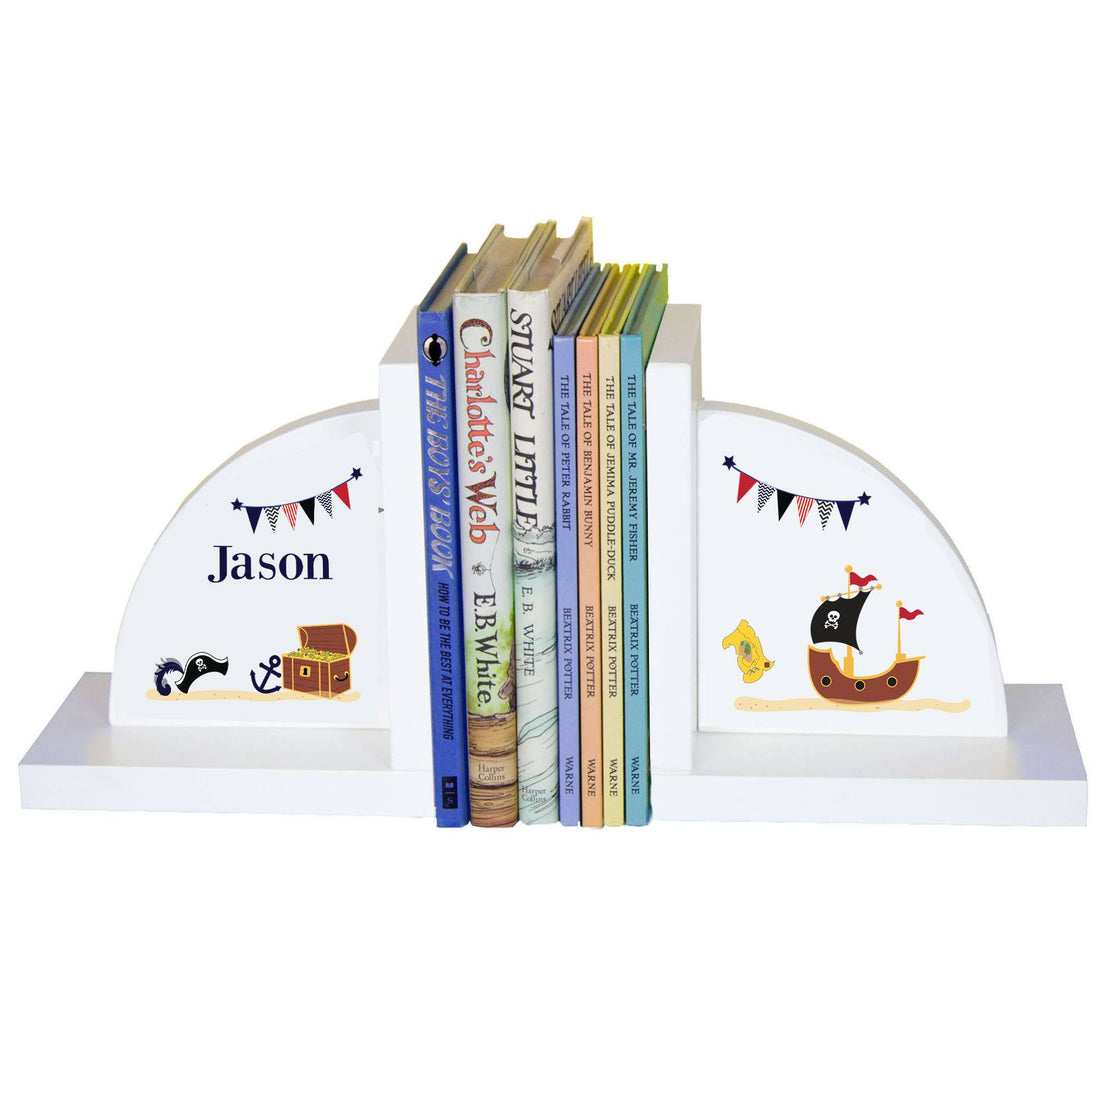 Personalized White Bookends with Pirate design